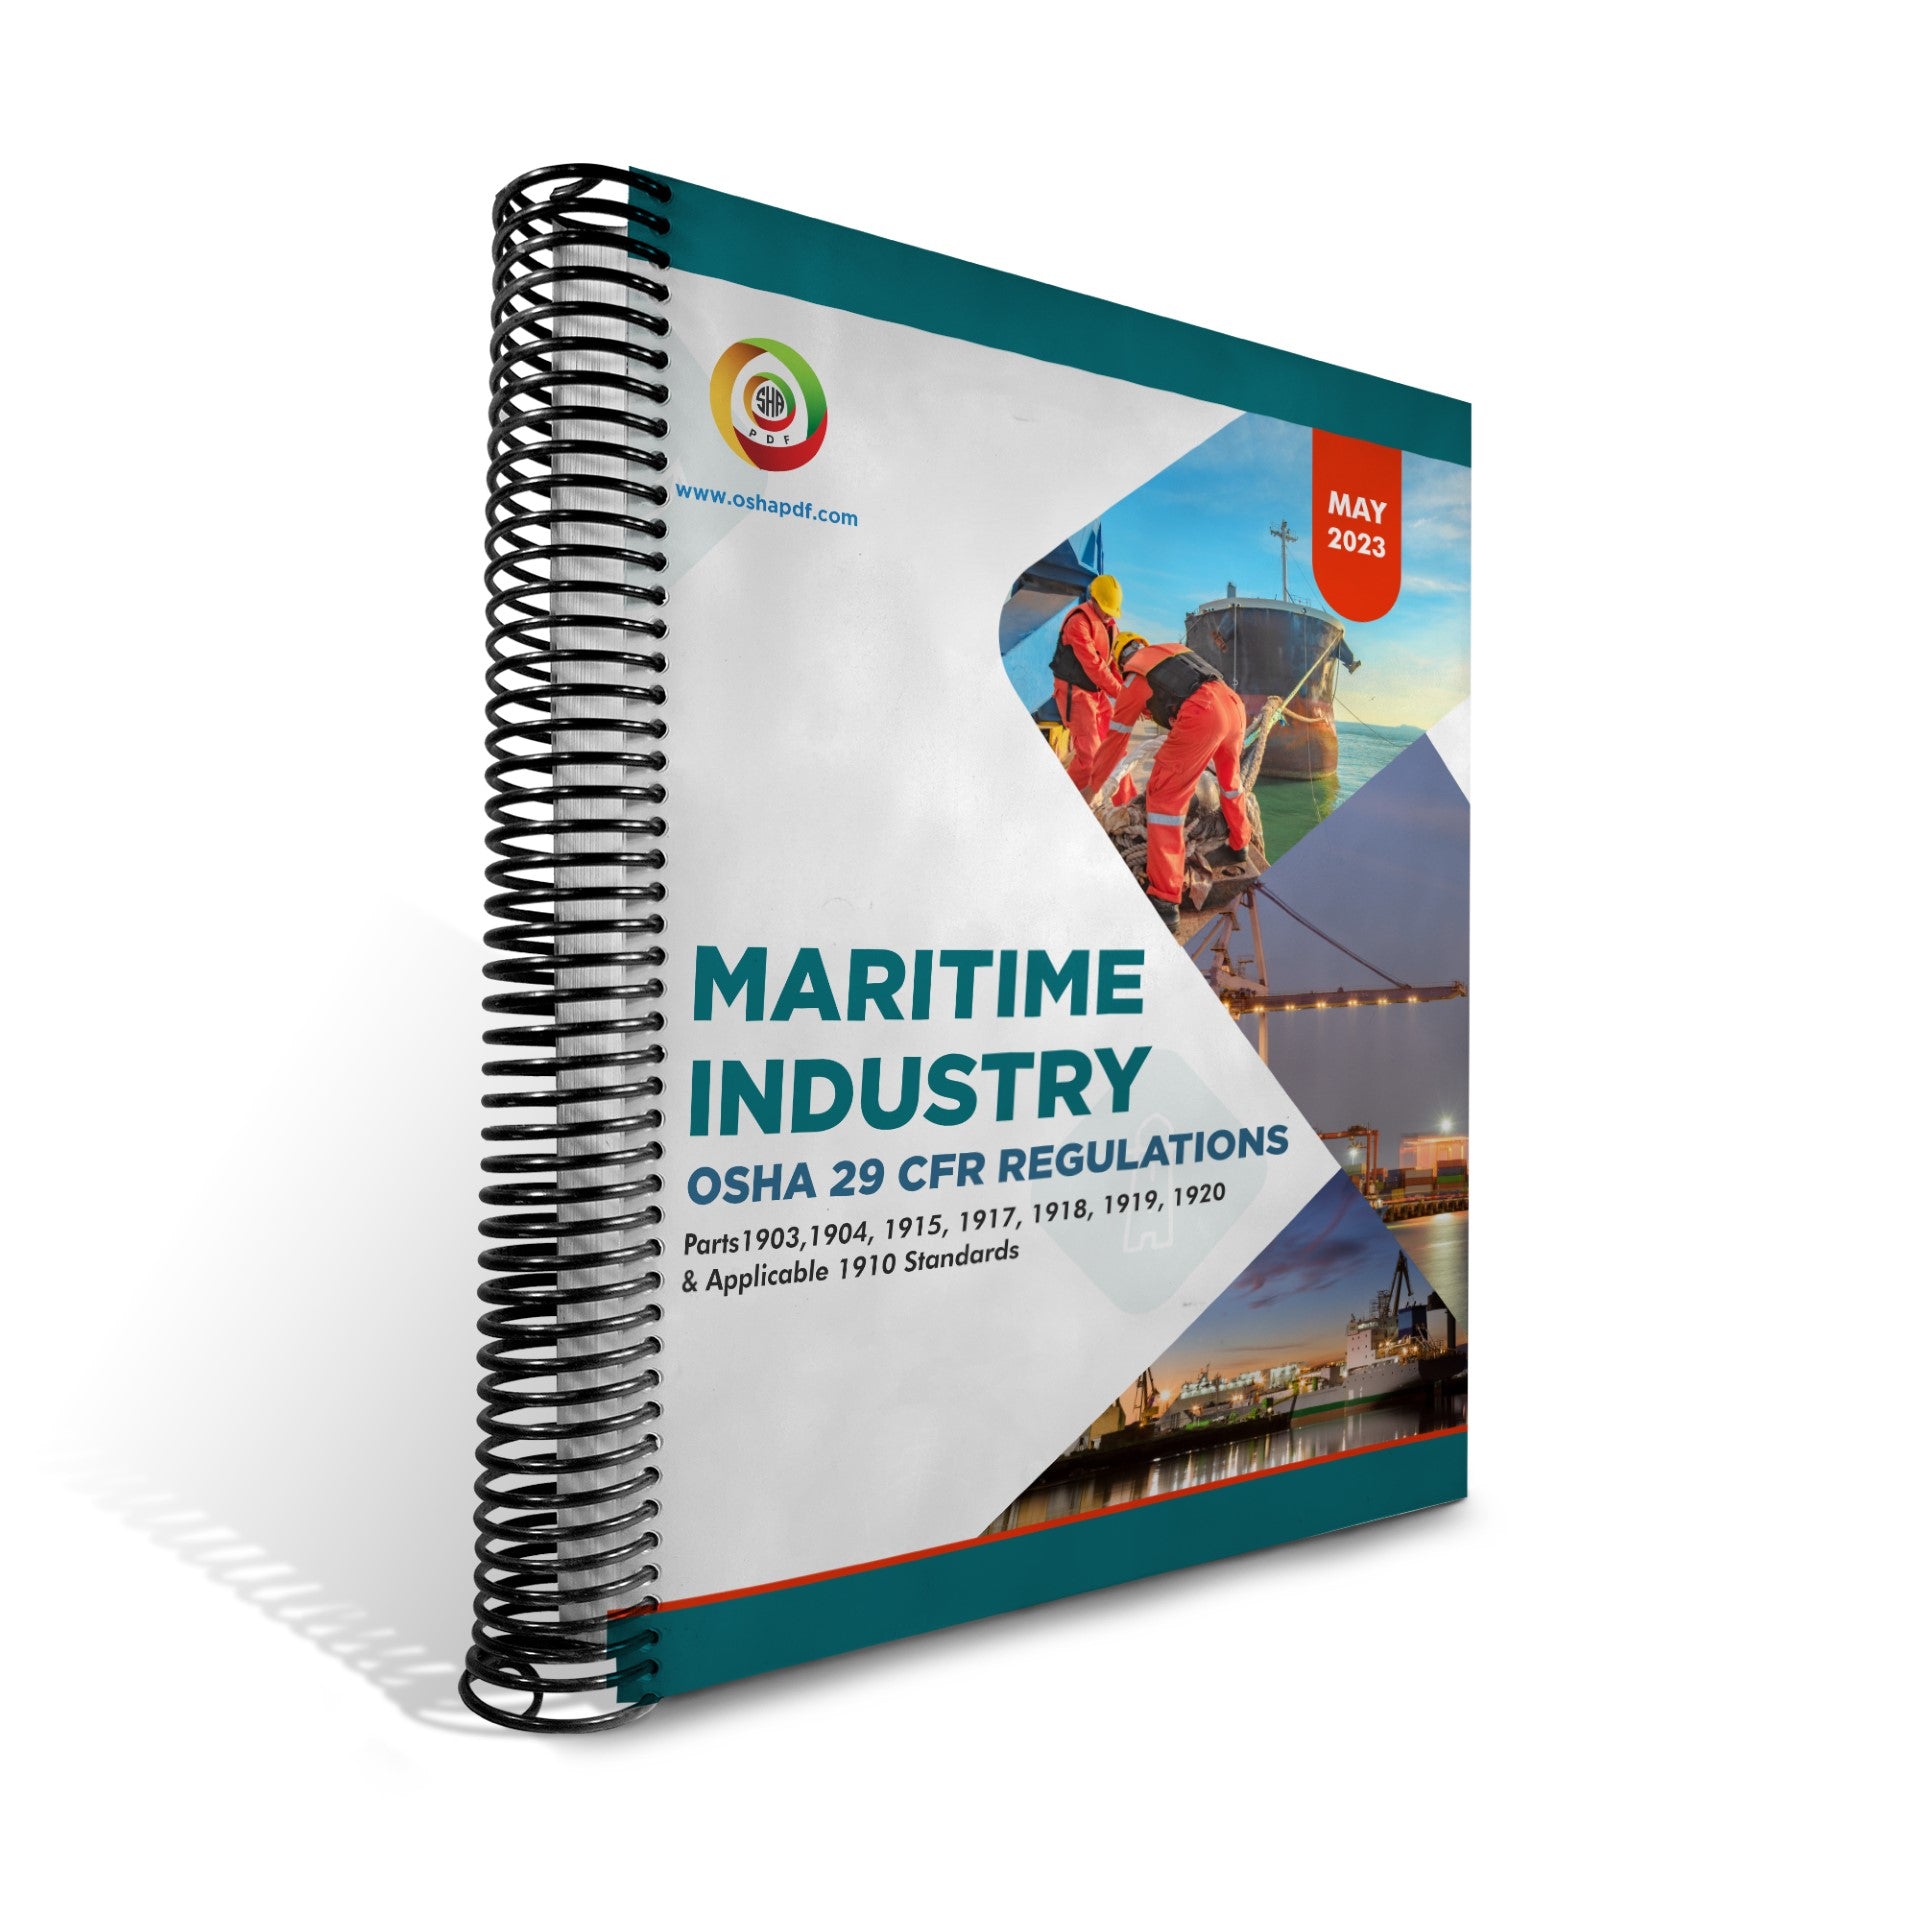 Maritime Industry Regulations - May 2023